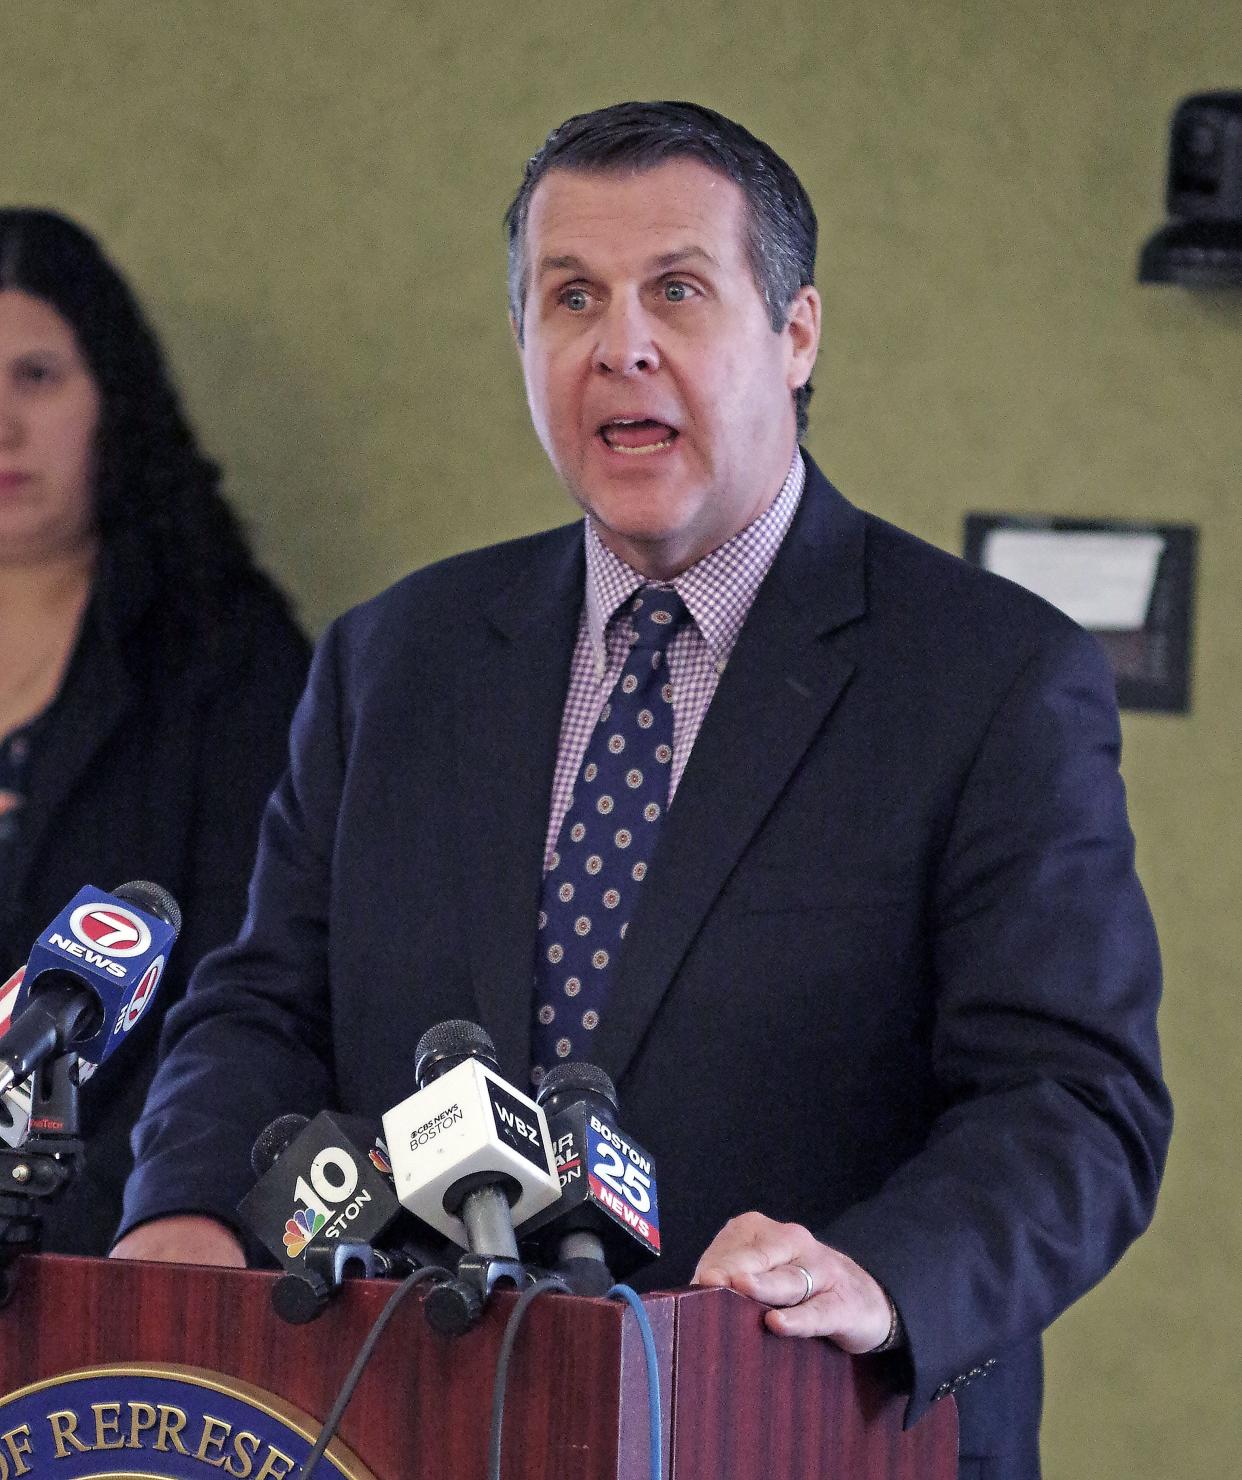 Brockton Mayor Sullivan said the Department of Elementary and Secondary Education (DESE) will conduct a safety audit for all Brockton Public Schools.